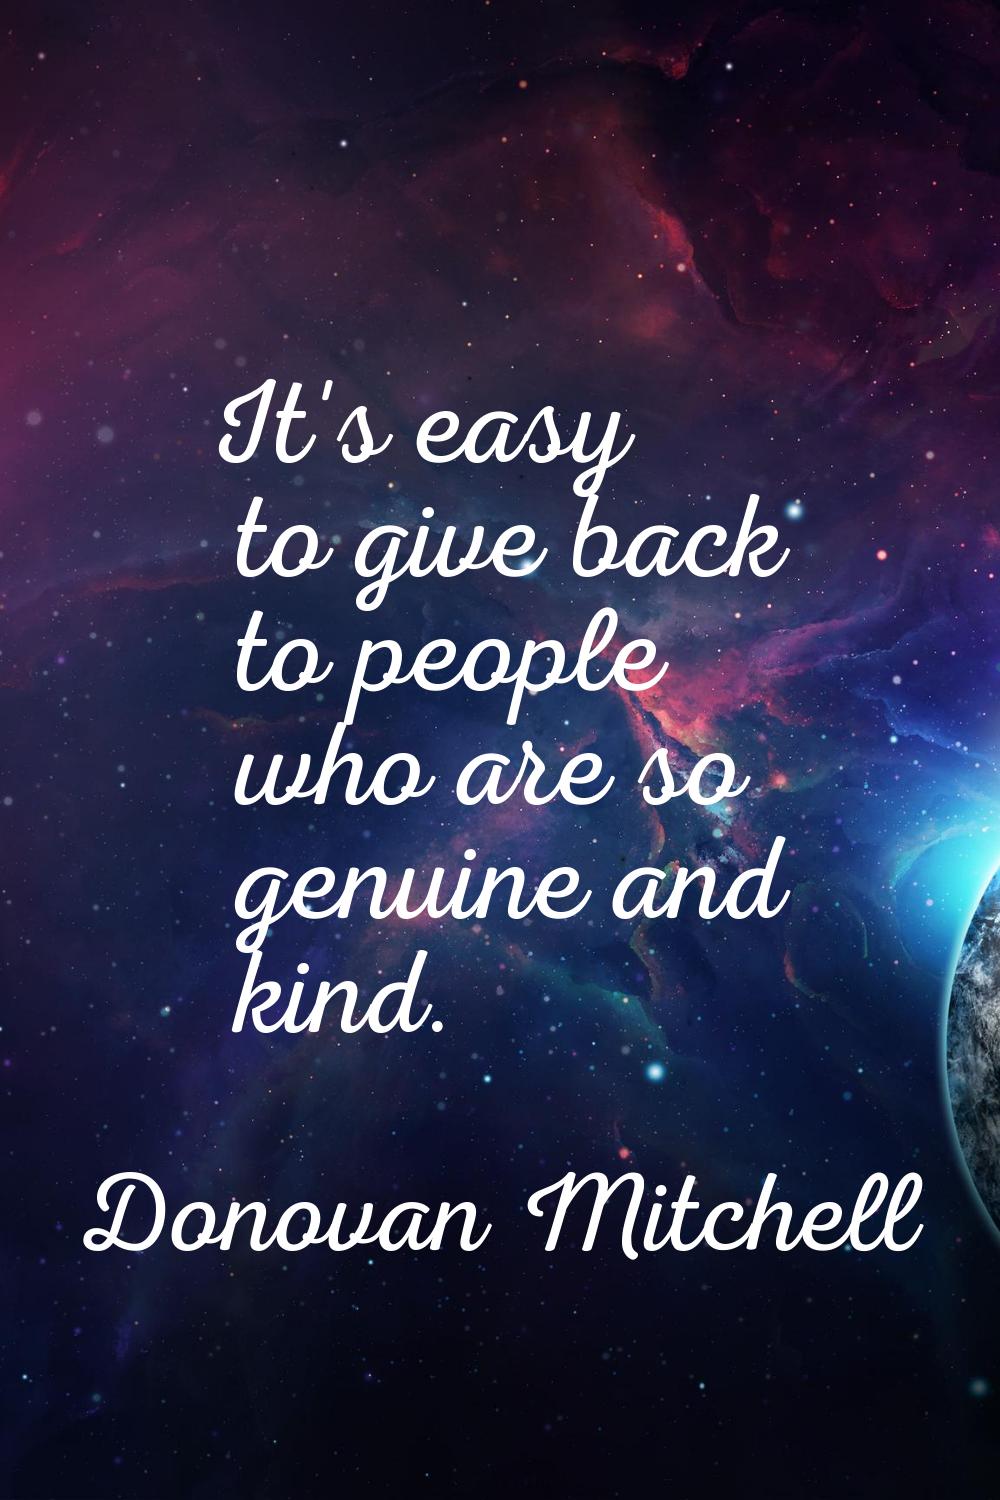 It's easy to give back to people who are so genuine and kind.